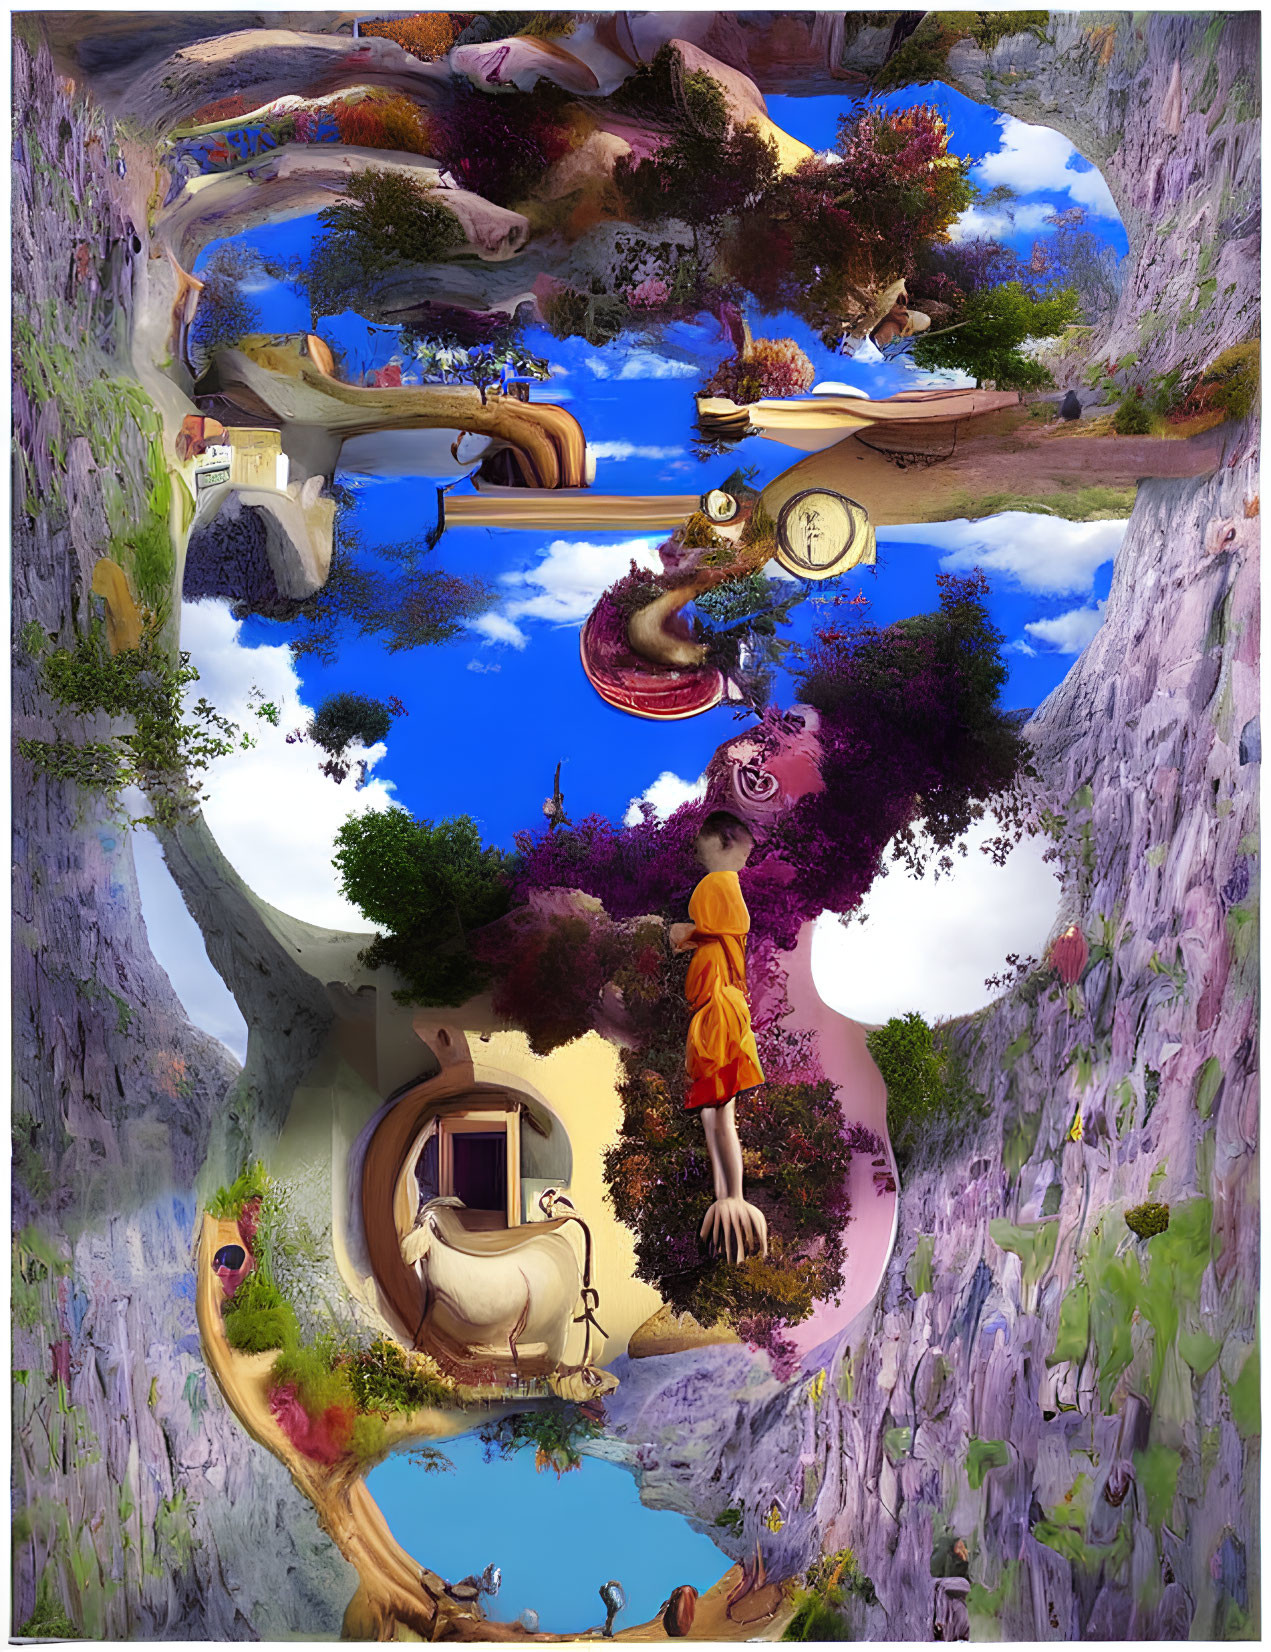 Circular surreal composition with orange figure in fantastical environment blending water bodies, flora, and whimsical architecture